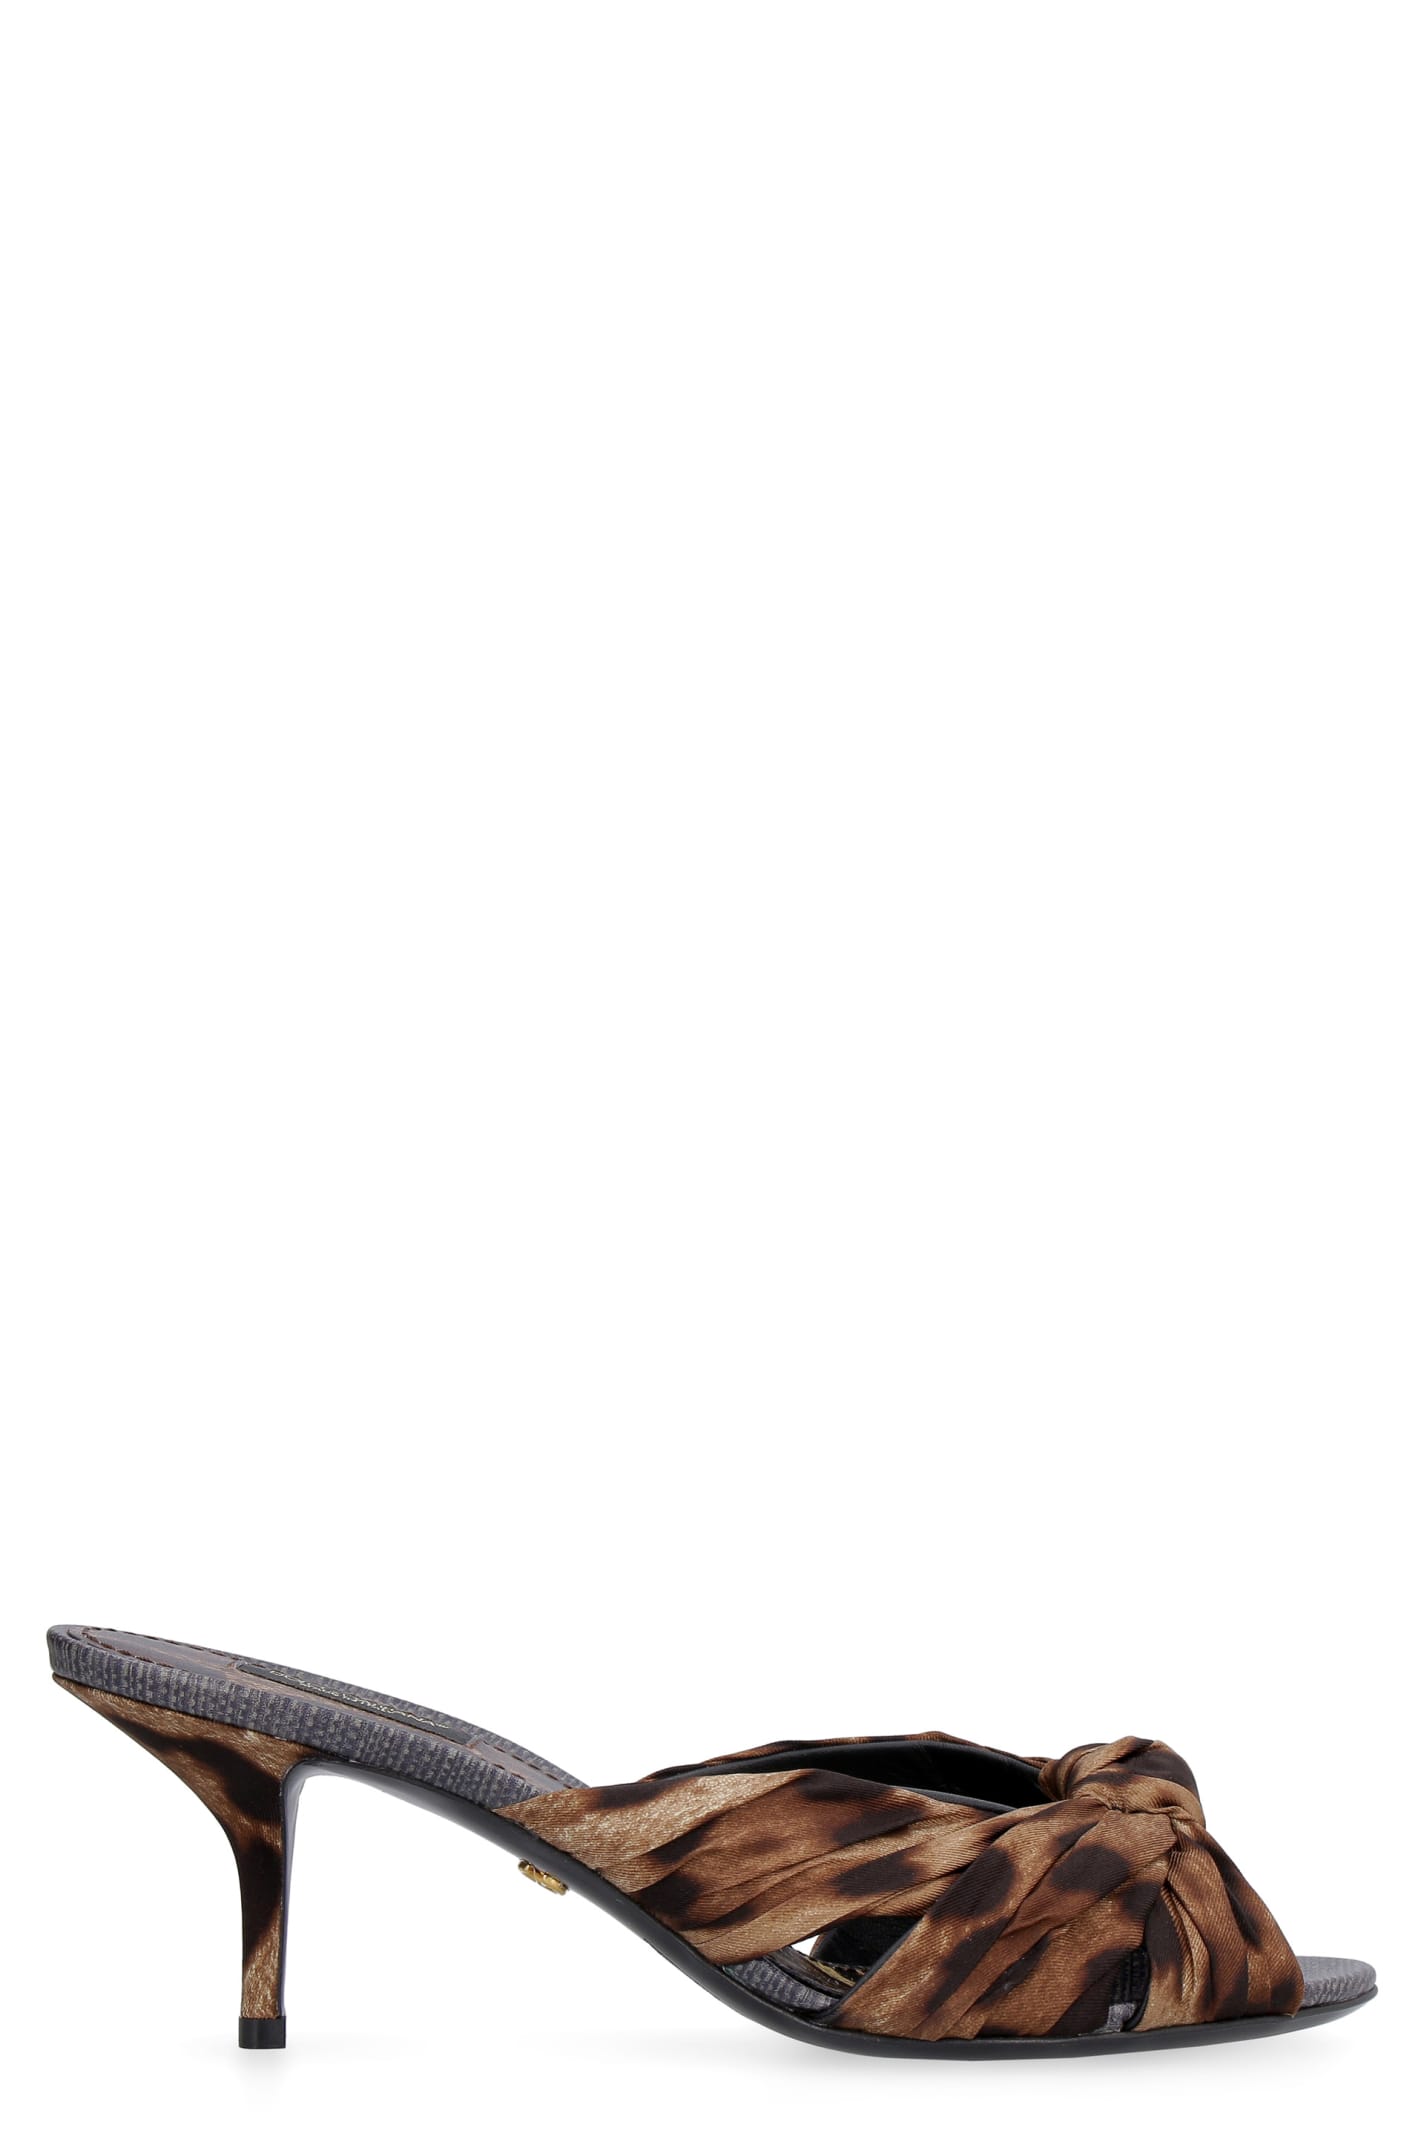 Buy Dolce & Gabbana Keira Satin Mules online, shop Dolce & Gabbana shoes with free shipping